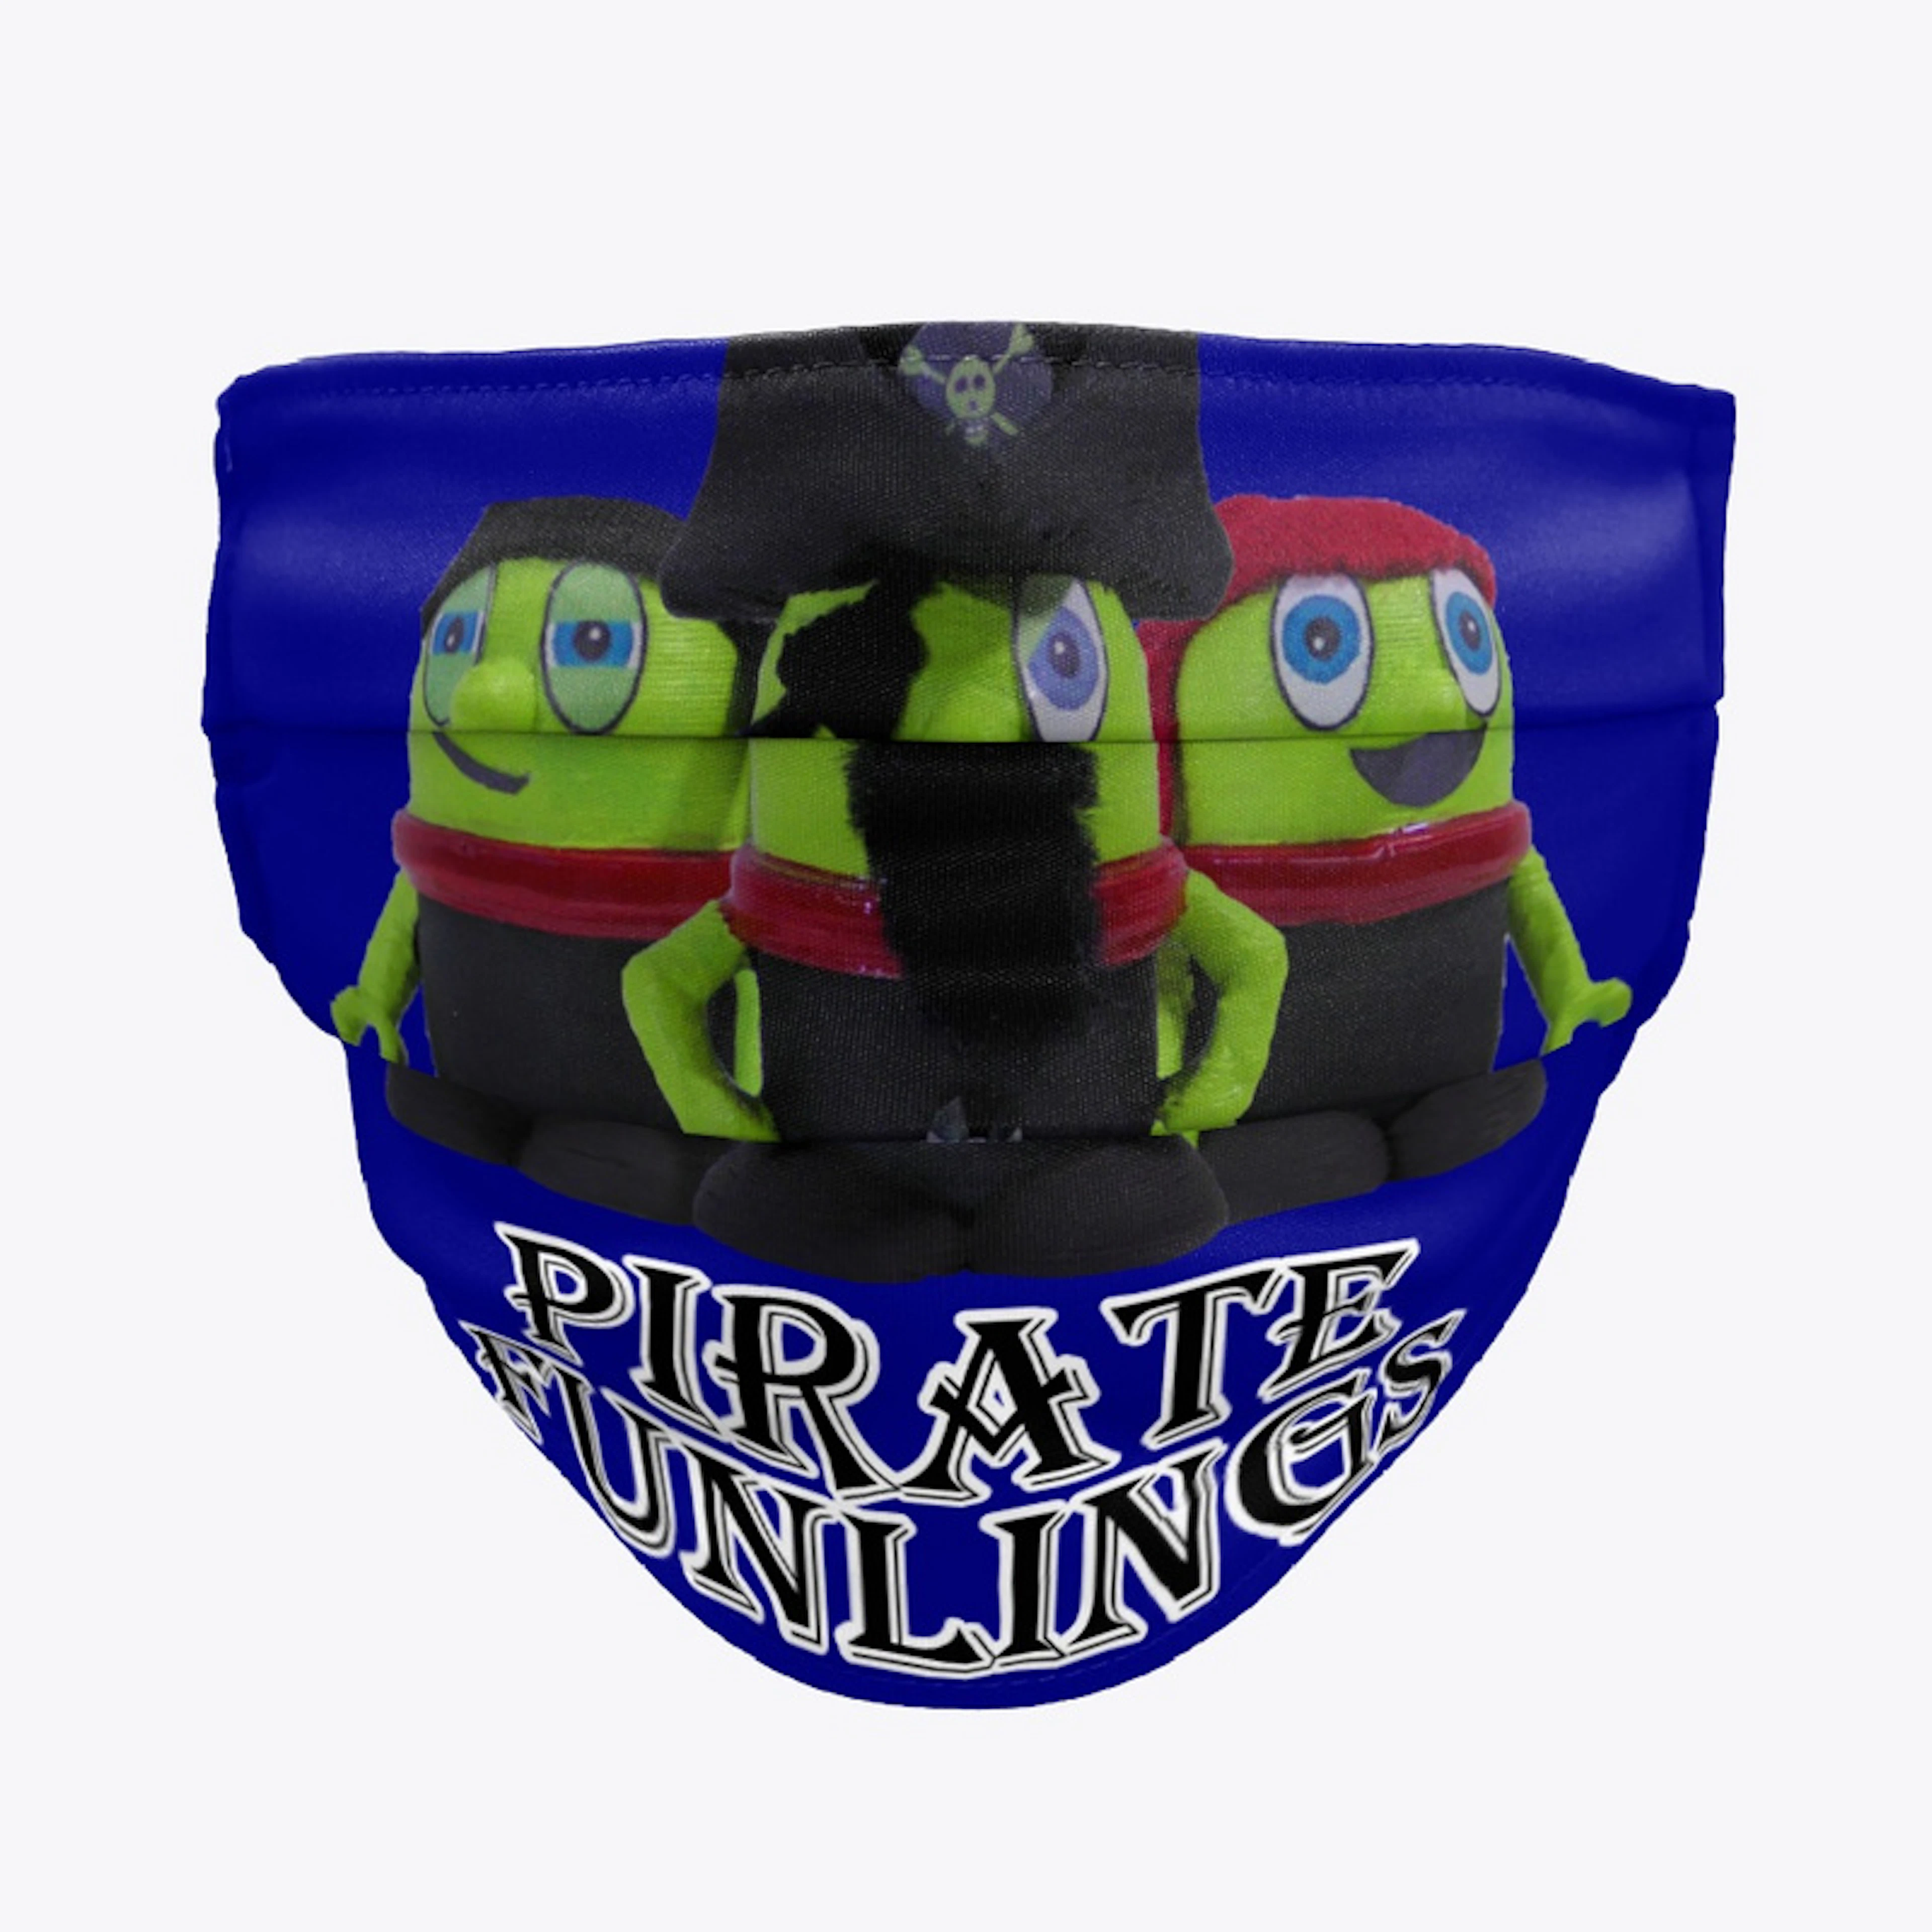 Facemask with Pirate Funlings